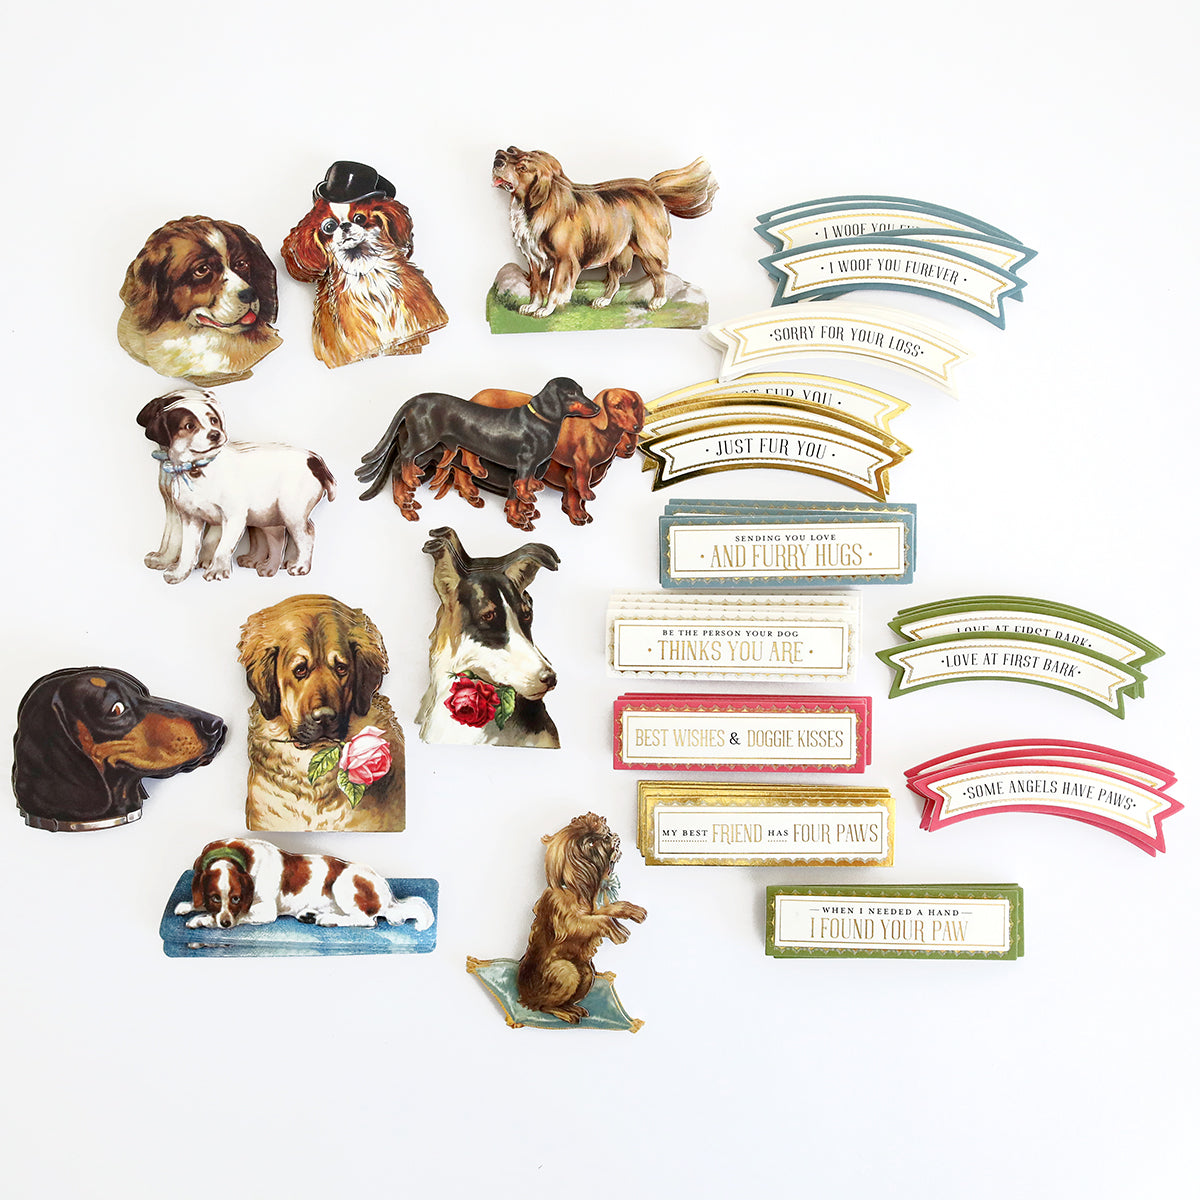 A collection of Fur Baby Dog Stickers and Sentiments displayed on white scrapbook pages.